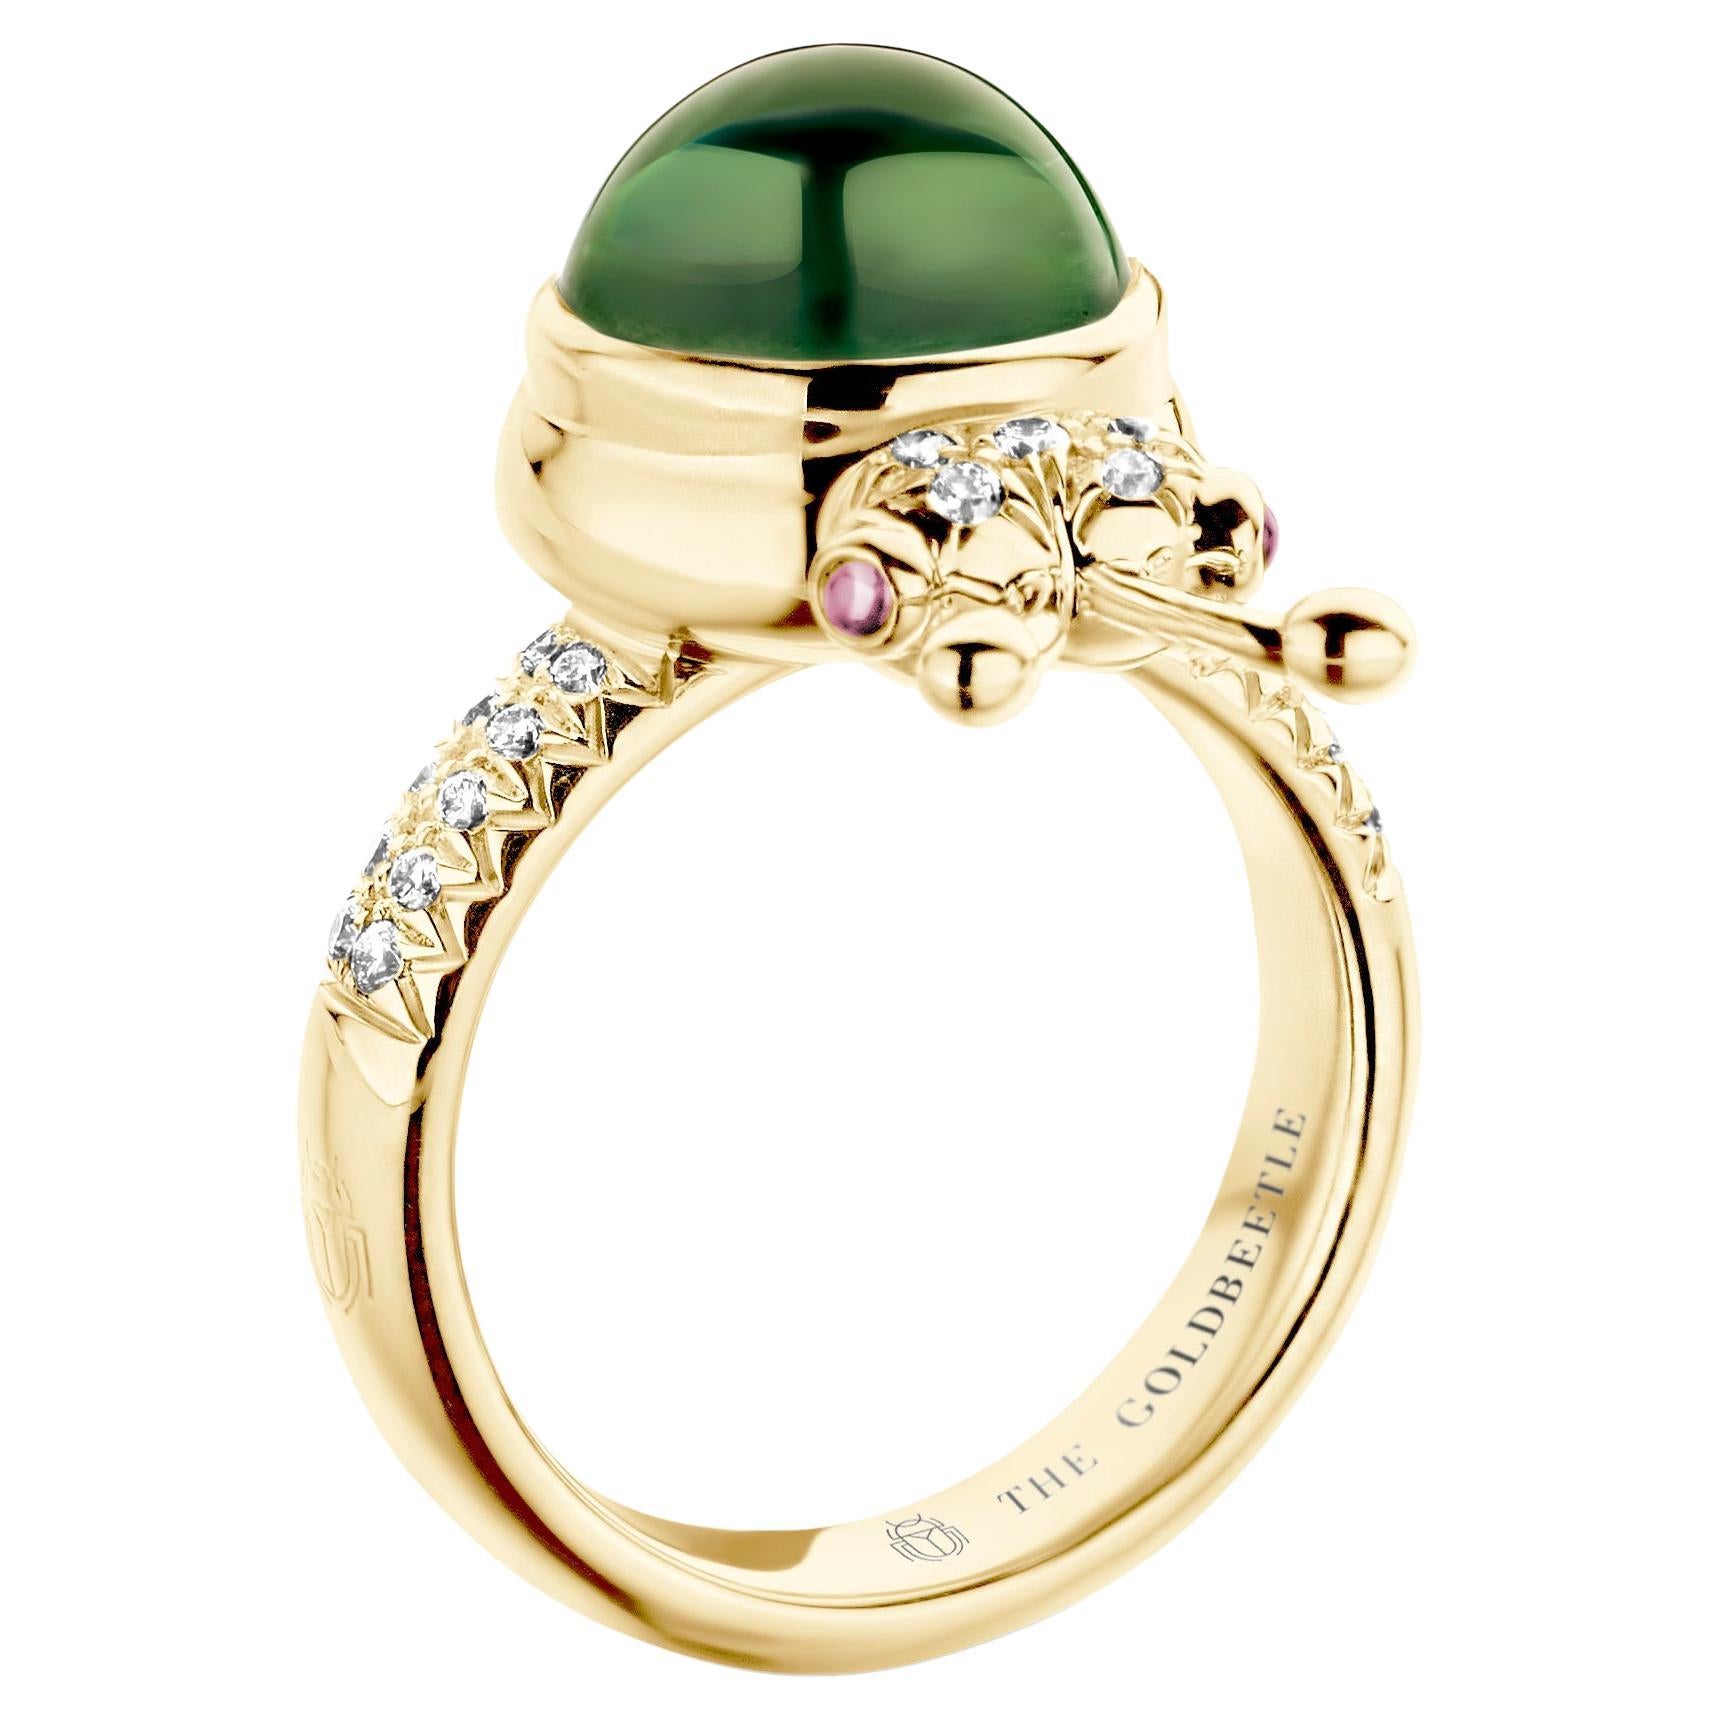 One-of-a-kind lucky beetle ring in 18-Karat yellow gold 10g set with the finest natural diamonds in brilliant cut 0,23Ct (VVS/DEF quality) one natural, green tourmaline in round cabochon cut 6,00 Carat and two pink tourmalines in round cabochon cut.